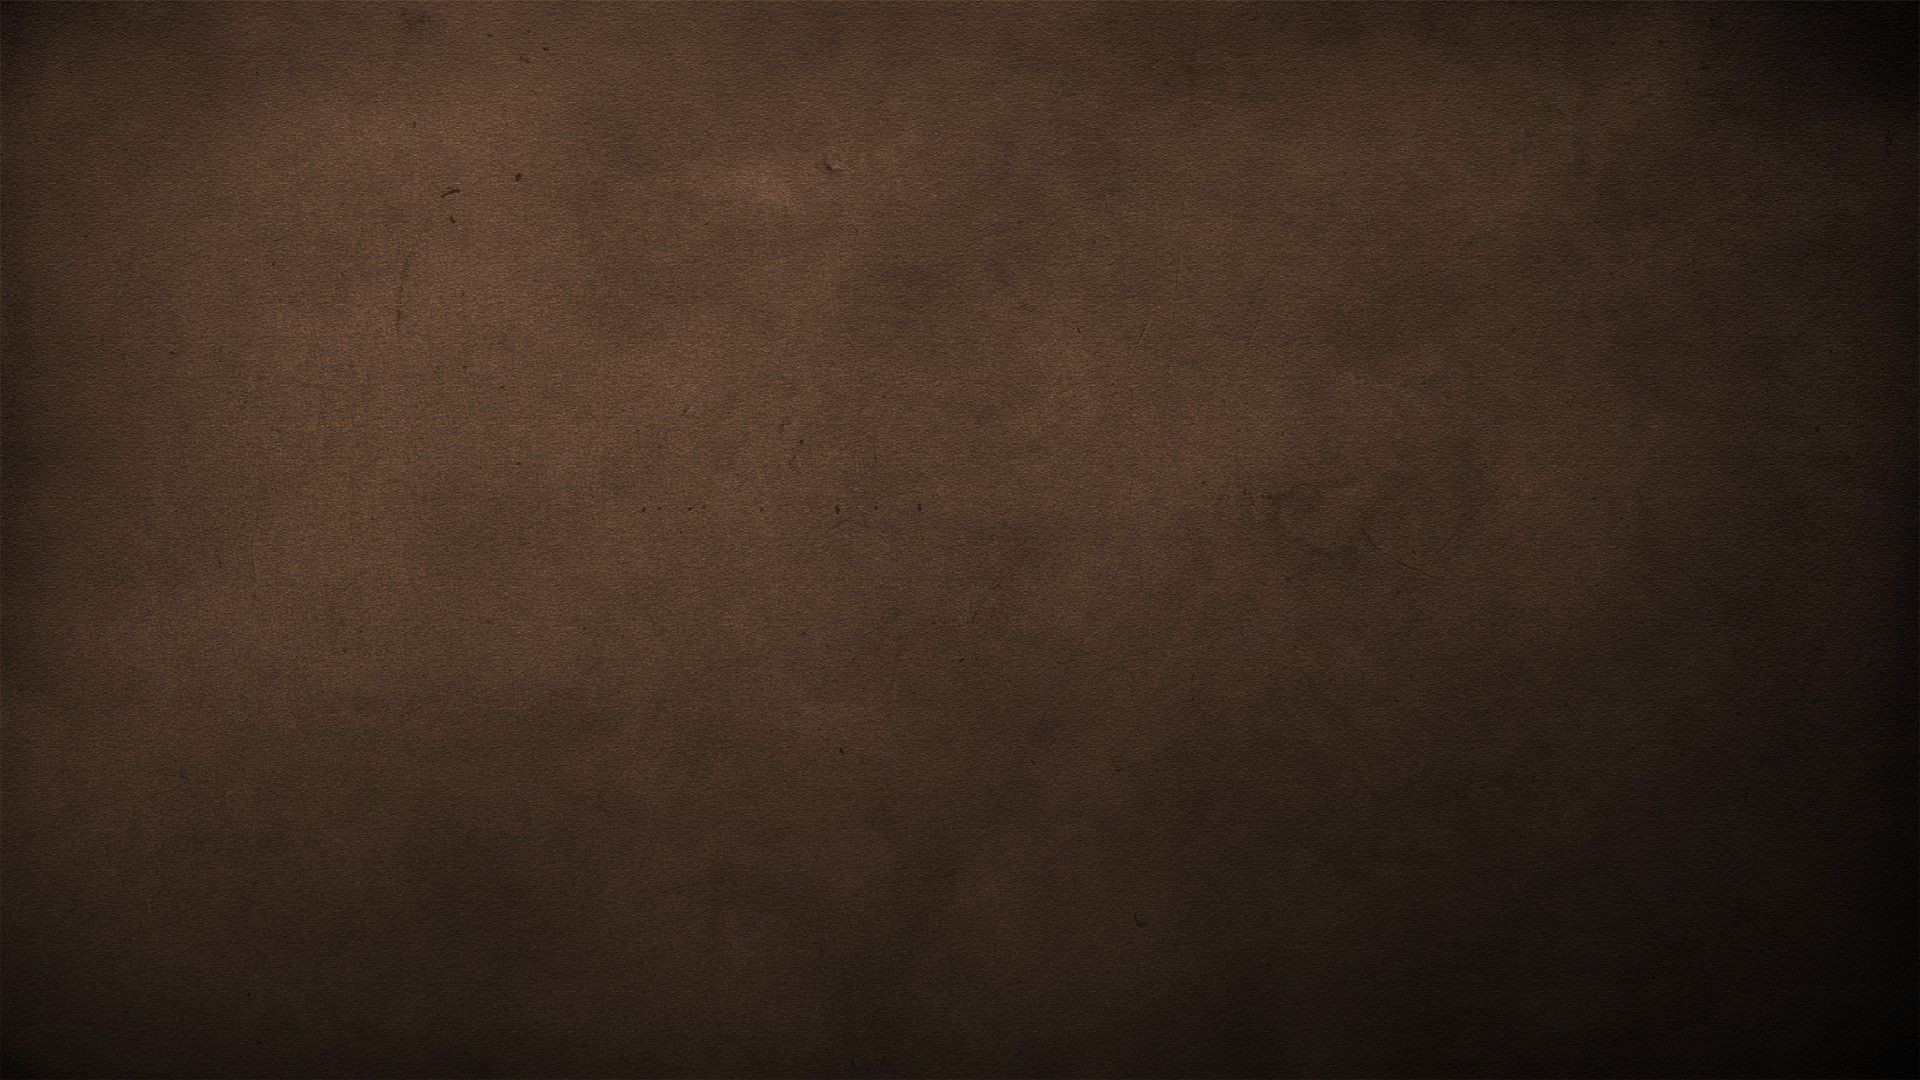 1920x1080 Images Of Brown Textured